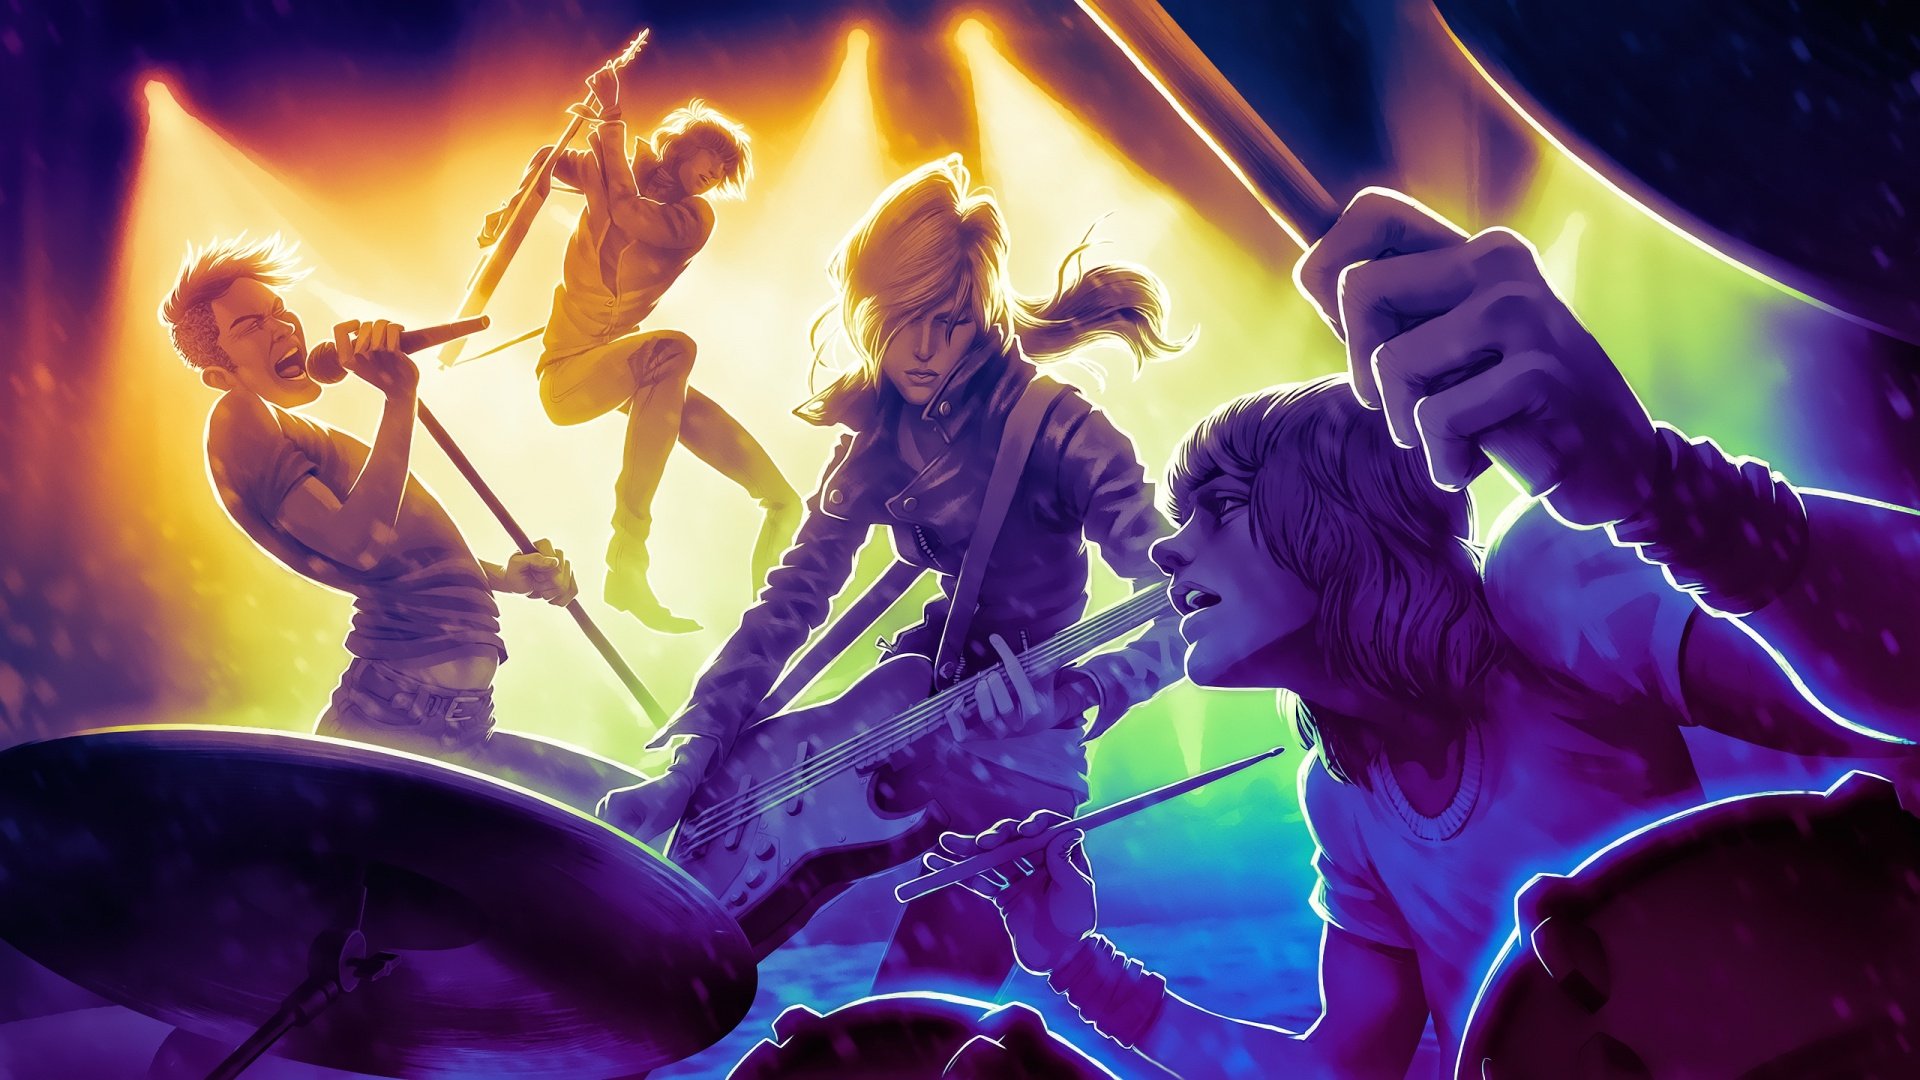 Rock Band 4 2015 Wallpapers   1920x1080   577742